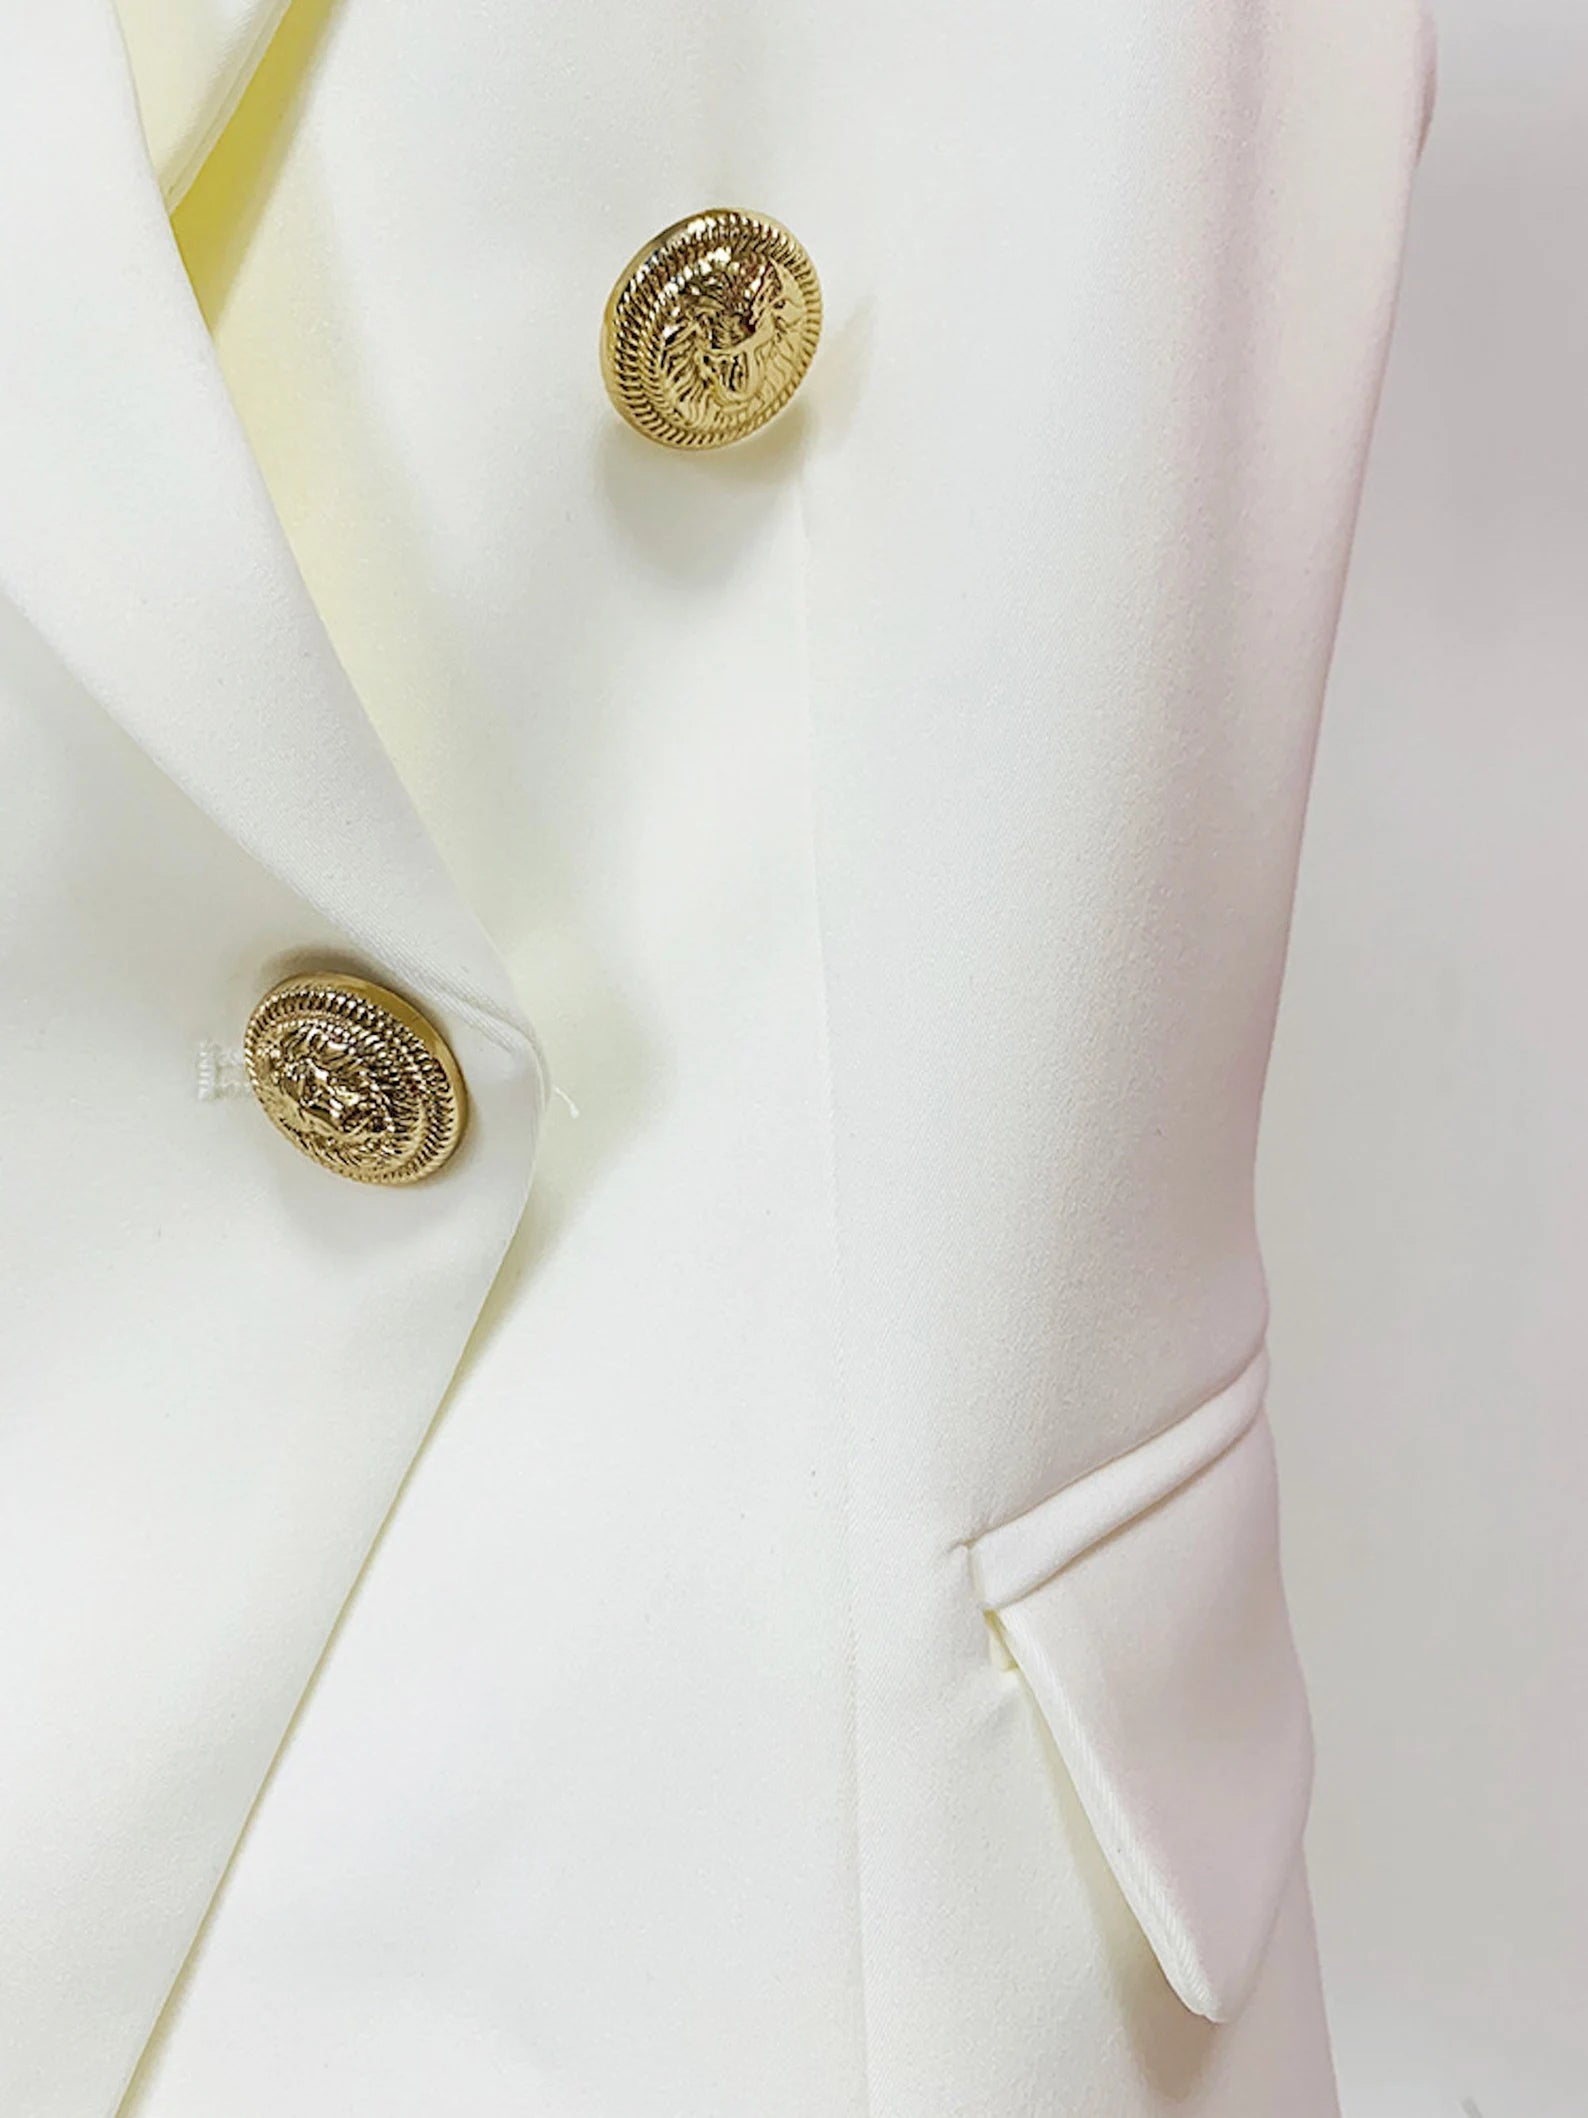 Women's Golden Lion Buttons Fitted Blazer Style Vest White  Gold-tone buttons provide a touch of nautical appeal to this blazer, while the ponte fabric gives it a comfortable yet polished style for classy to elegant for your professional everyday office work. Casual, work, business travels, meetings, formal, dinner dates, hangouts, and other special events are all appropriate occasions.